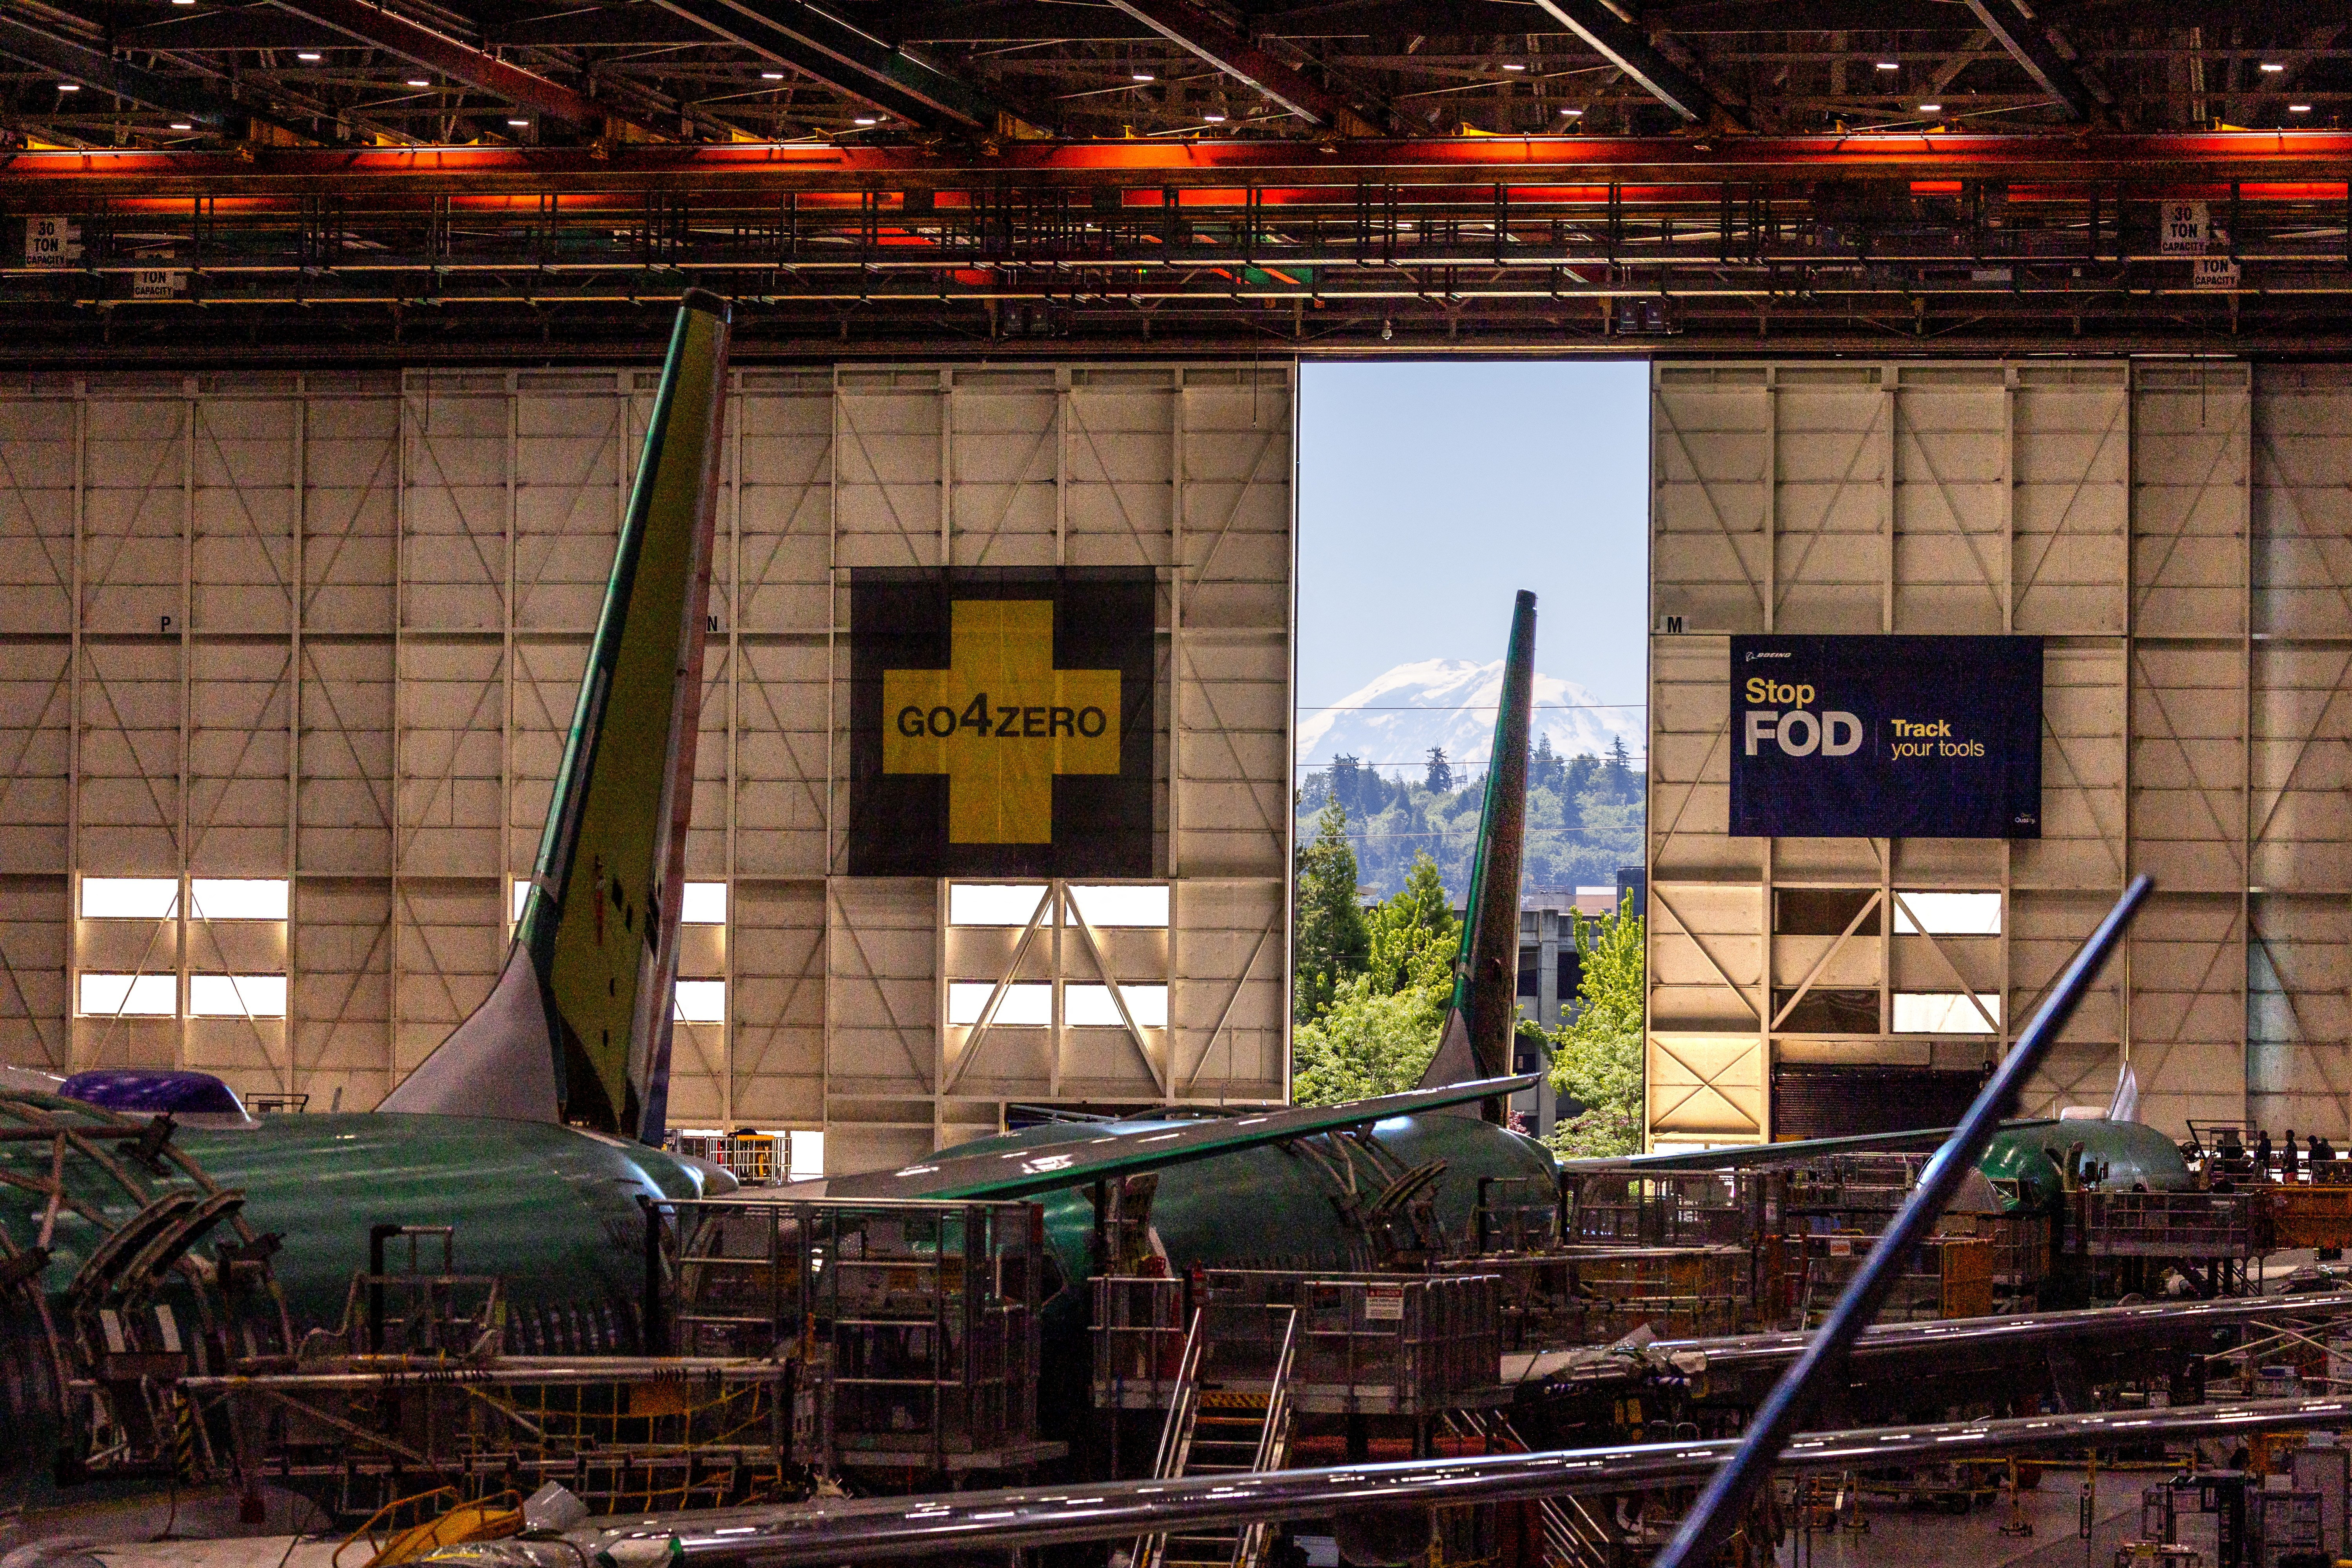 Boeing 737 MAX aircraft are assembled at the company's plant in Renton